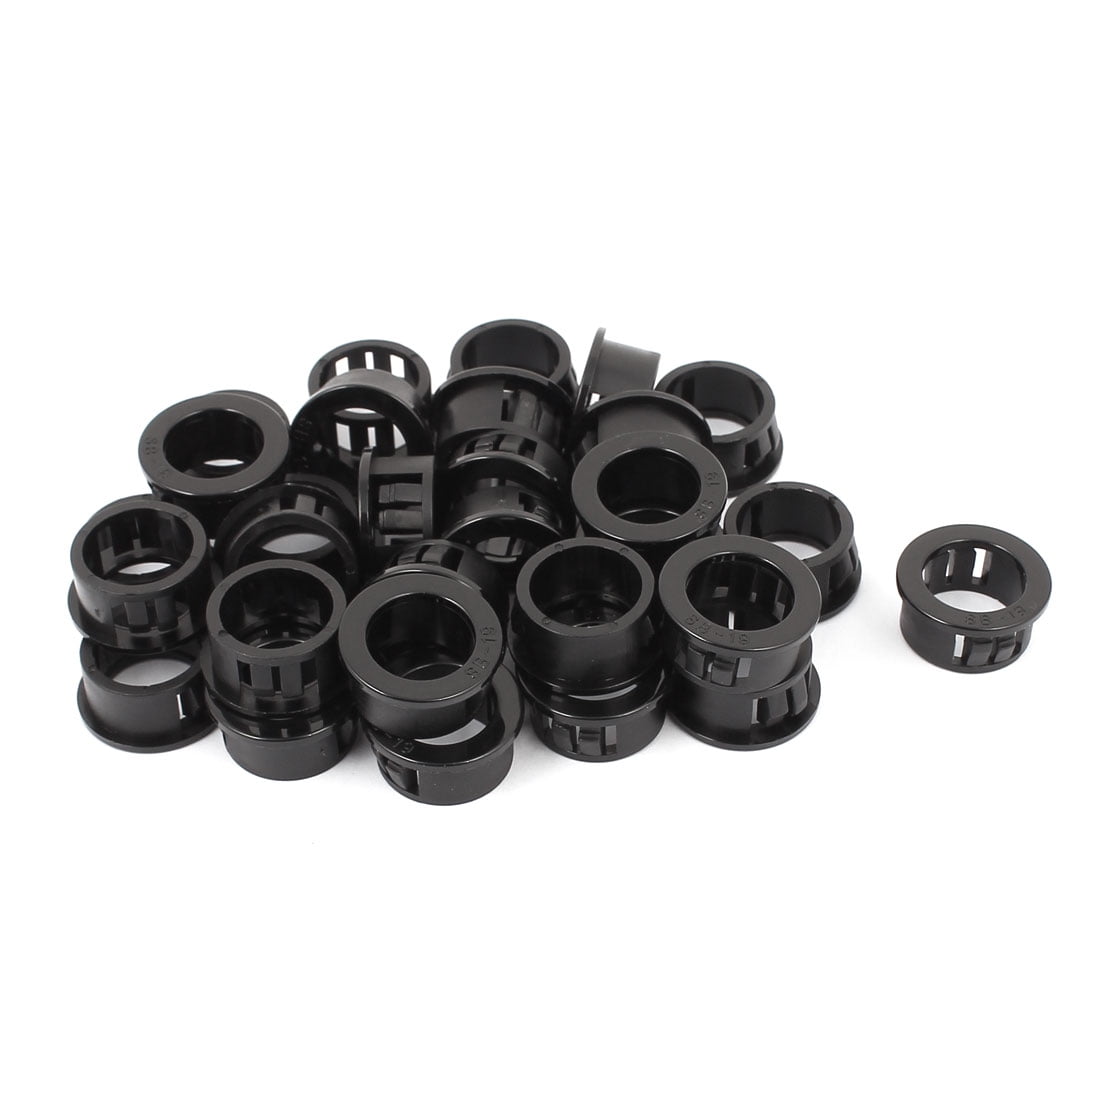 60pcs Black Plastic Cable Hose Harness Snap in Bushing Plugs Grommet 20mm x16mm 